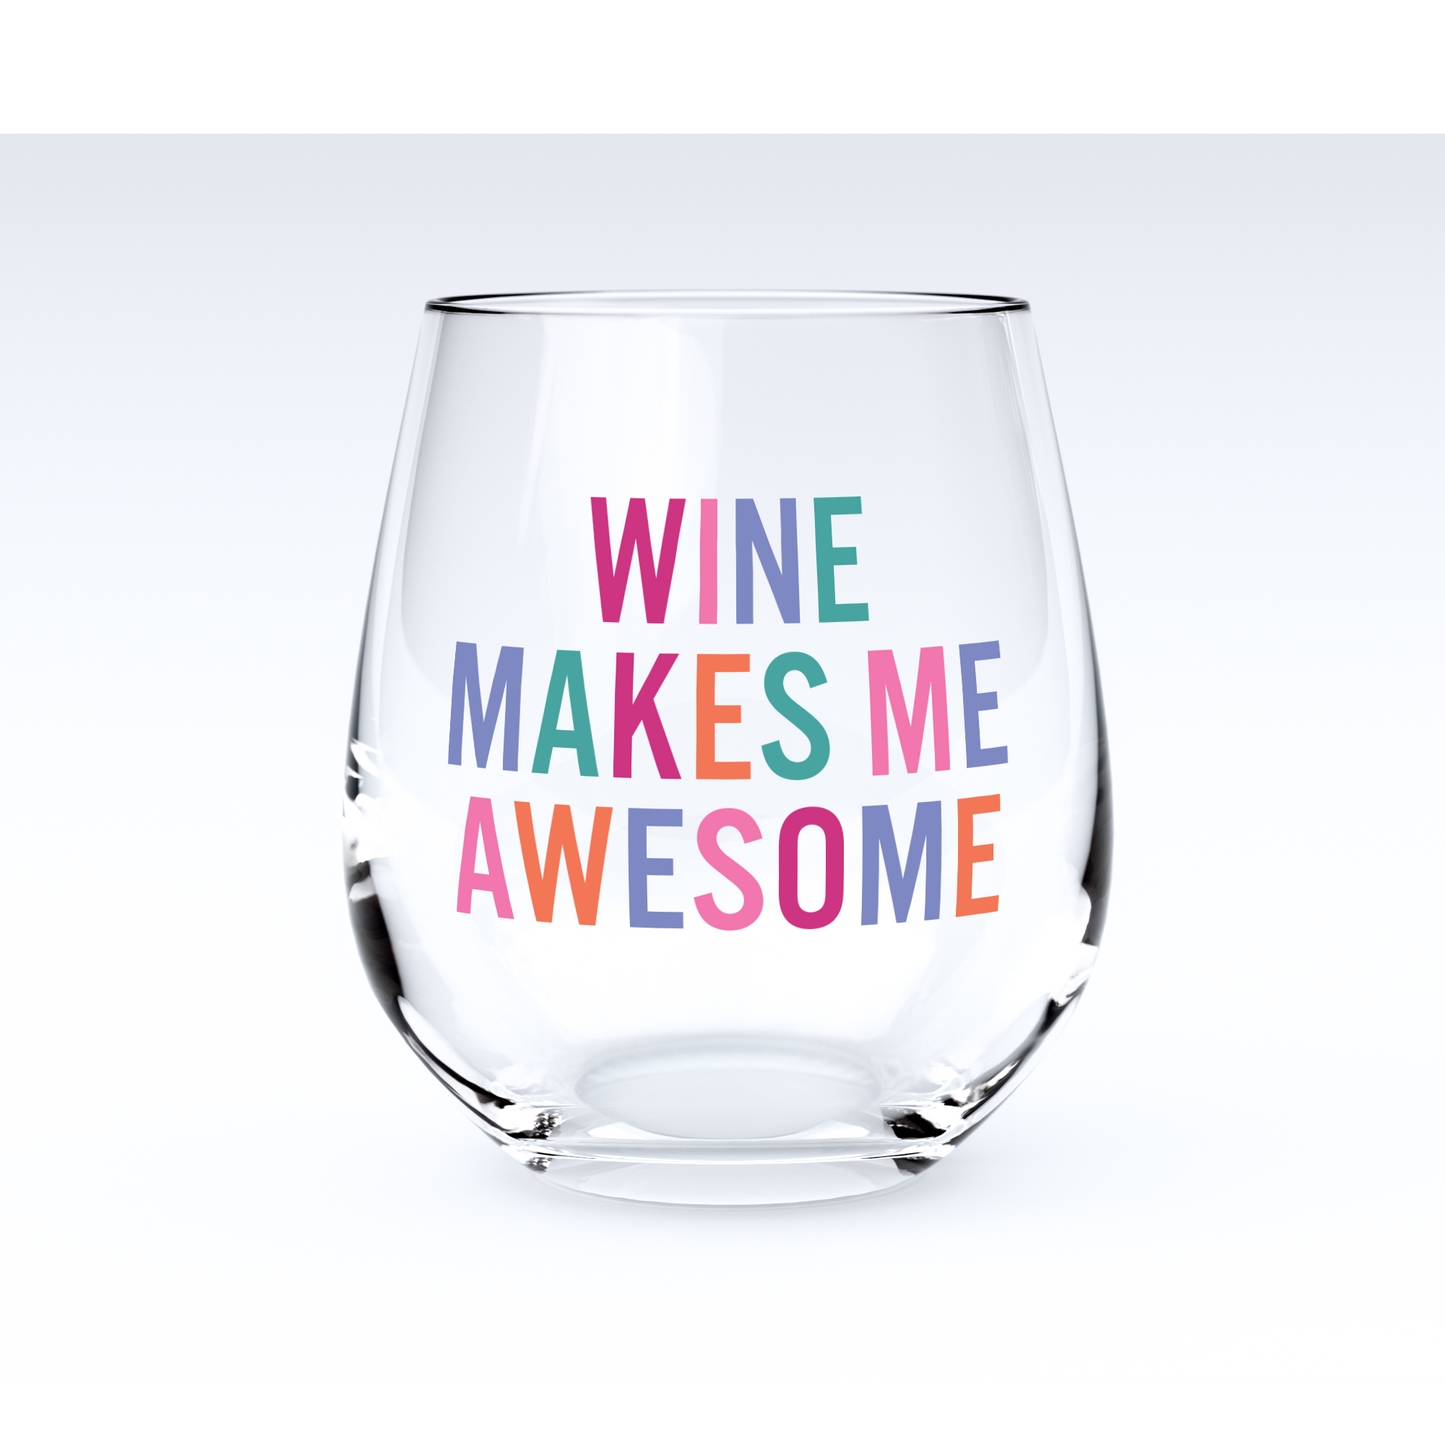 15oz Stemless Wine Glass - Wine Makes Me Awesome